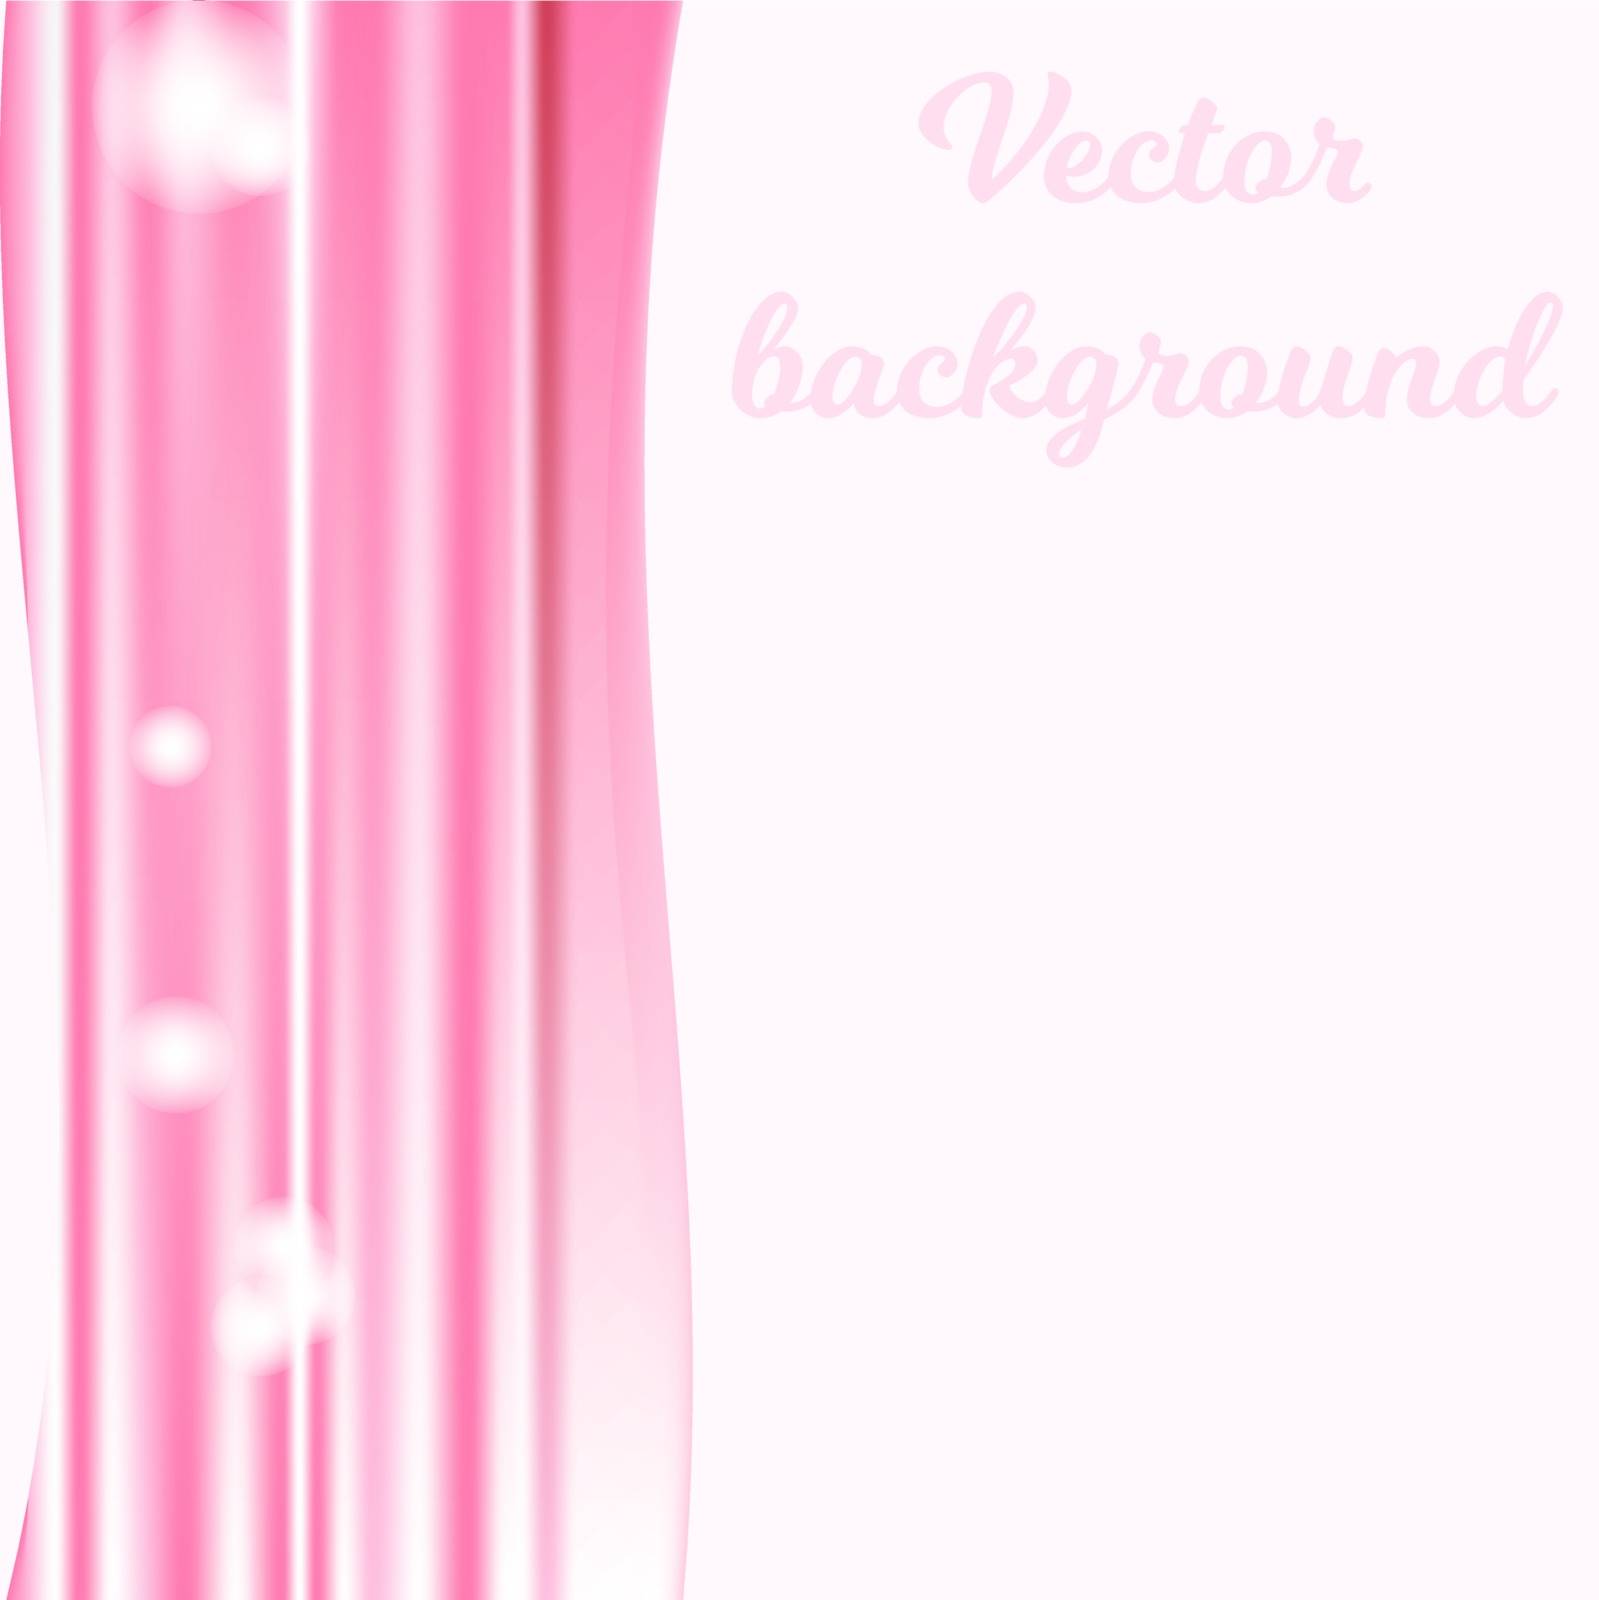 abstract wavy background by victosha